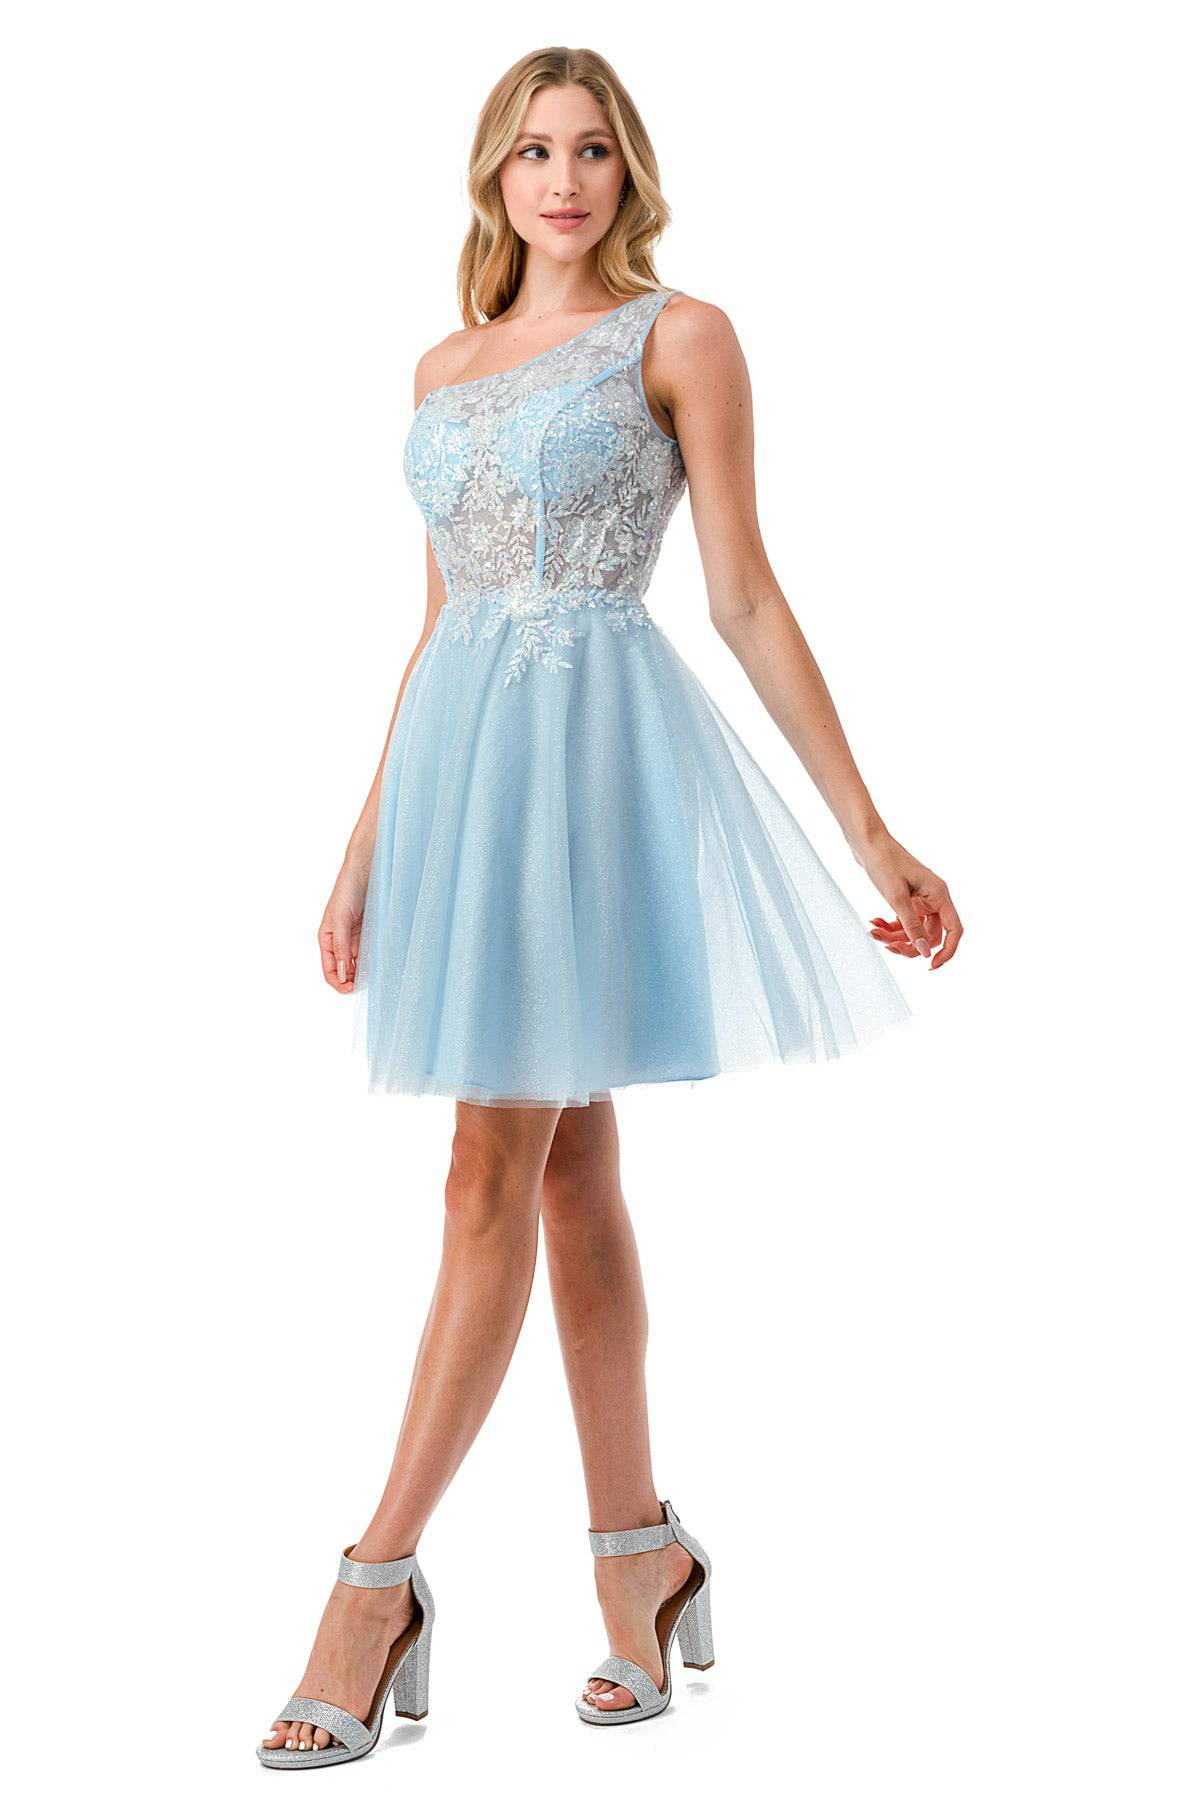 Aspeed S2723 Light Blue One Shoulder Lace & Sheer Short Dress - NORMA REED